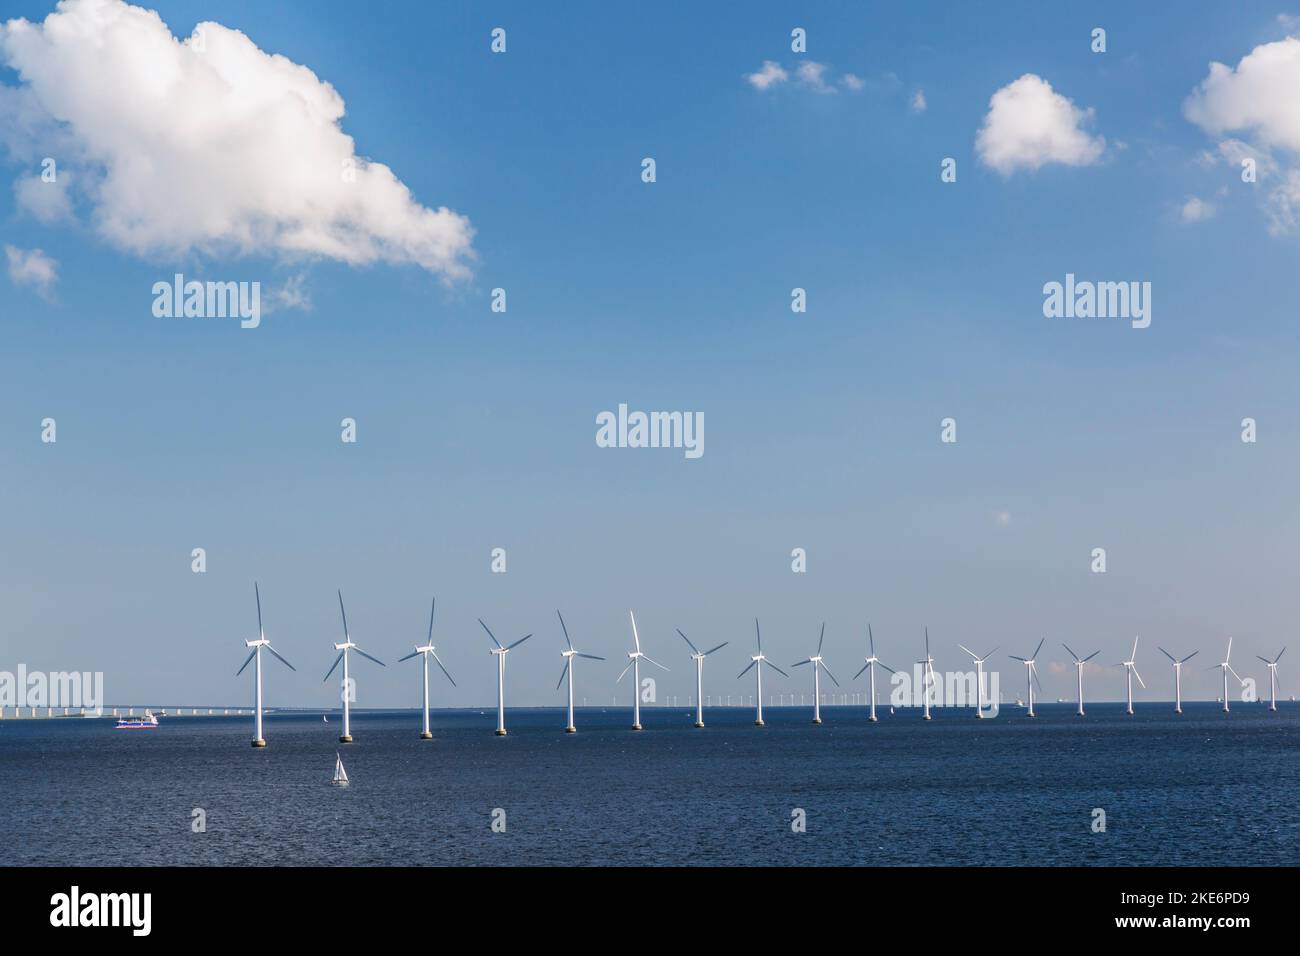 Small sailboat and row of wind turbines in Baltic Sea producing electricity off the coast of Denmark. Stock Photo